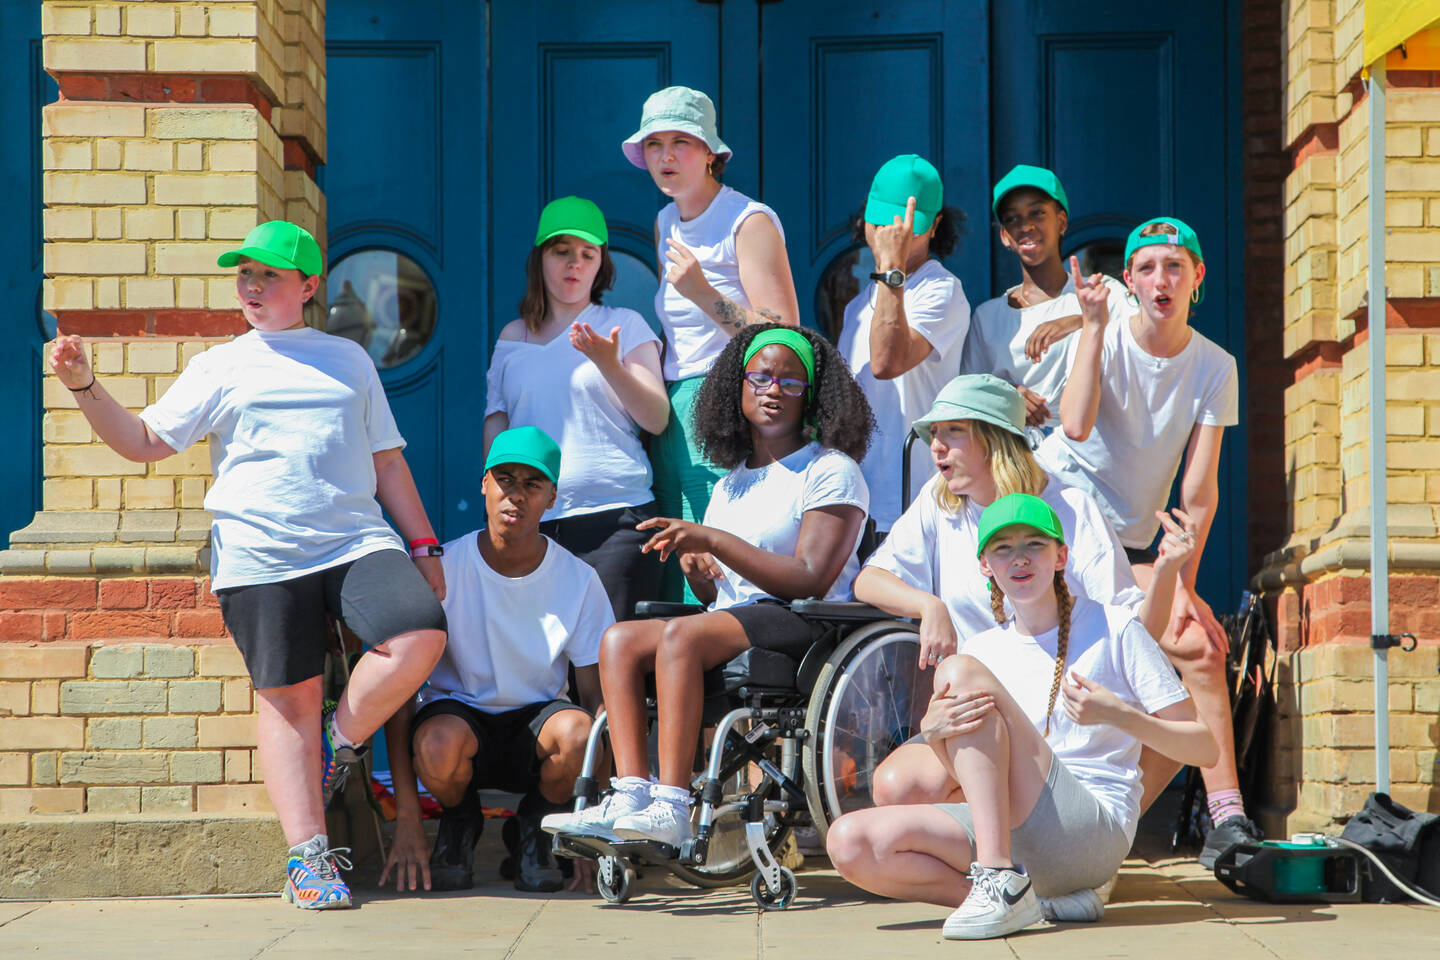 A group of children in white t-shirts and green caps stand in front of a blue door looking on.